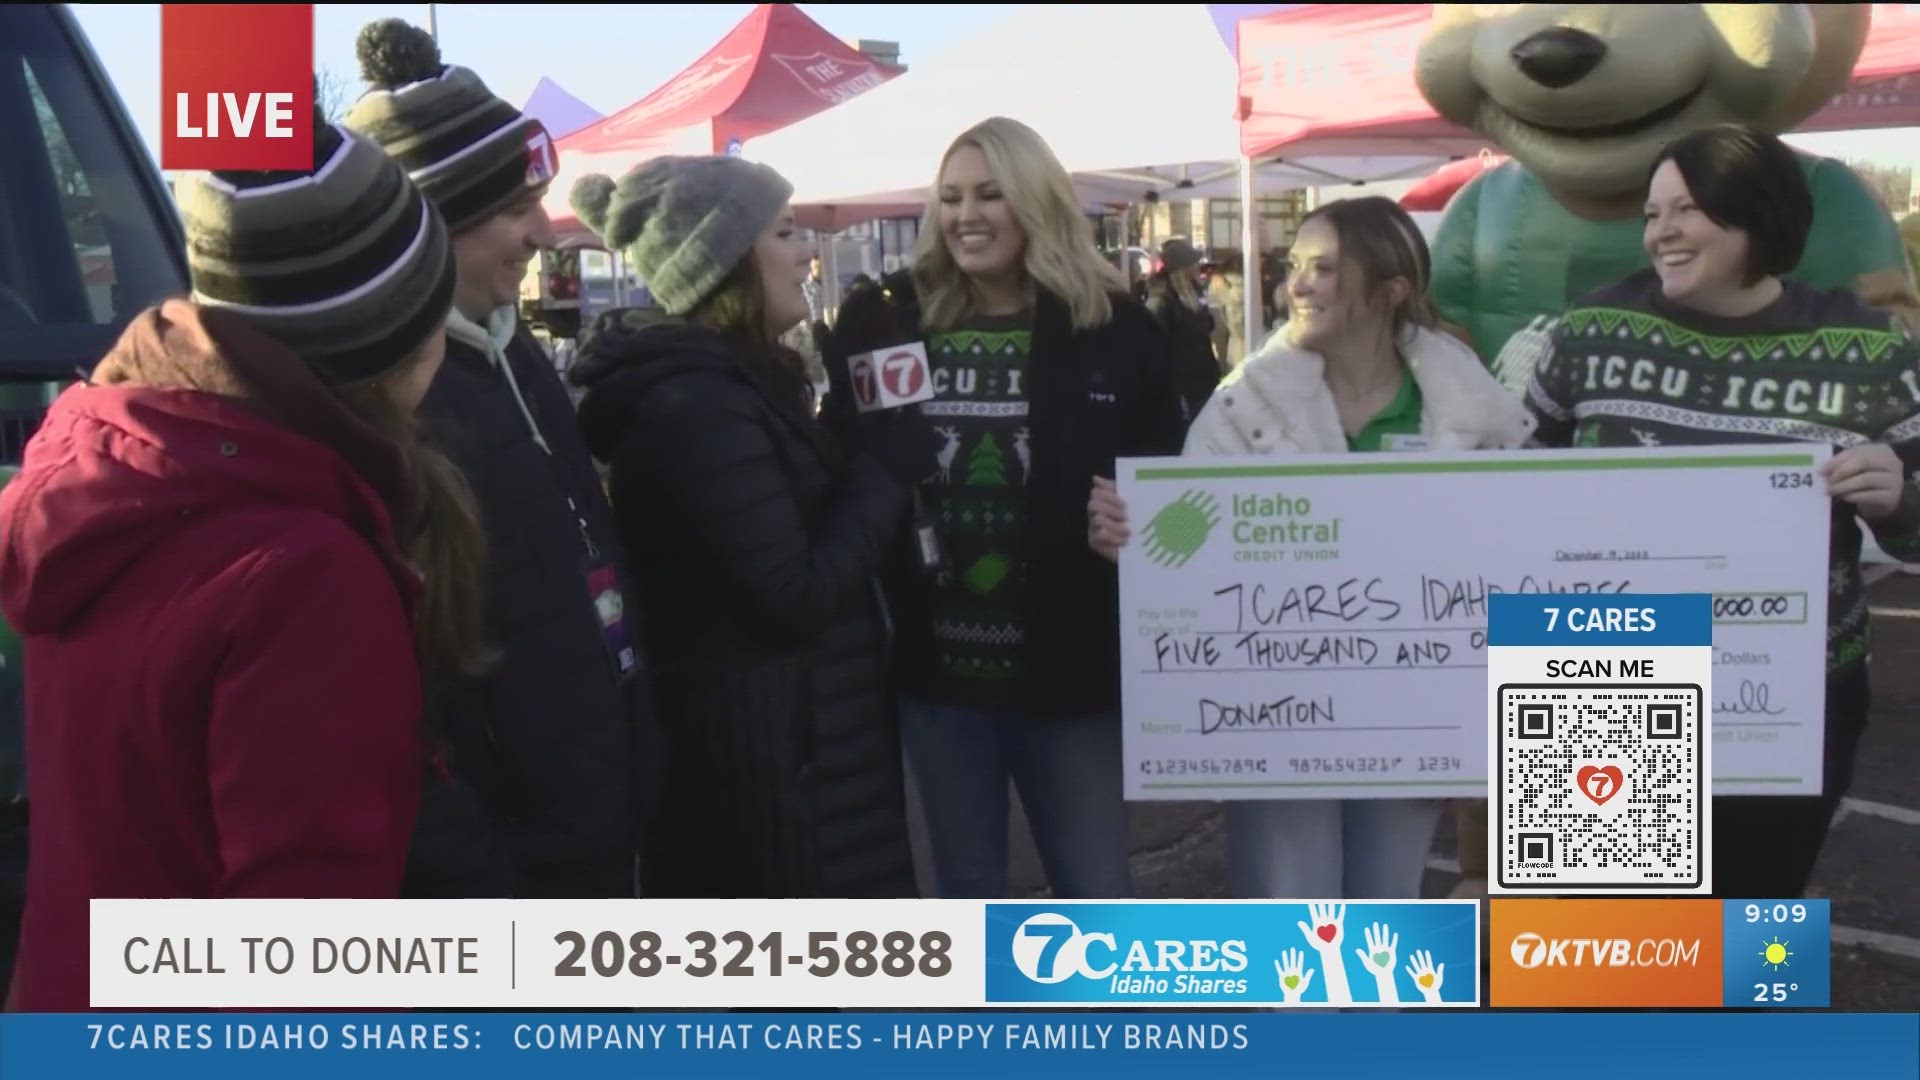 Idaho Central Credit Union, a featured Company that Cares, joined KTVB in Boise and Twin Falls on Saturday with two $5,000 checks for local charities.